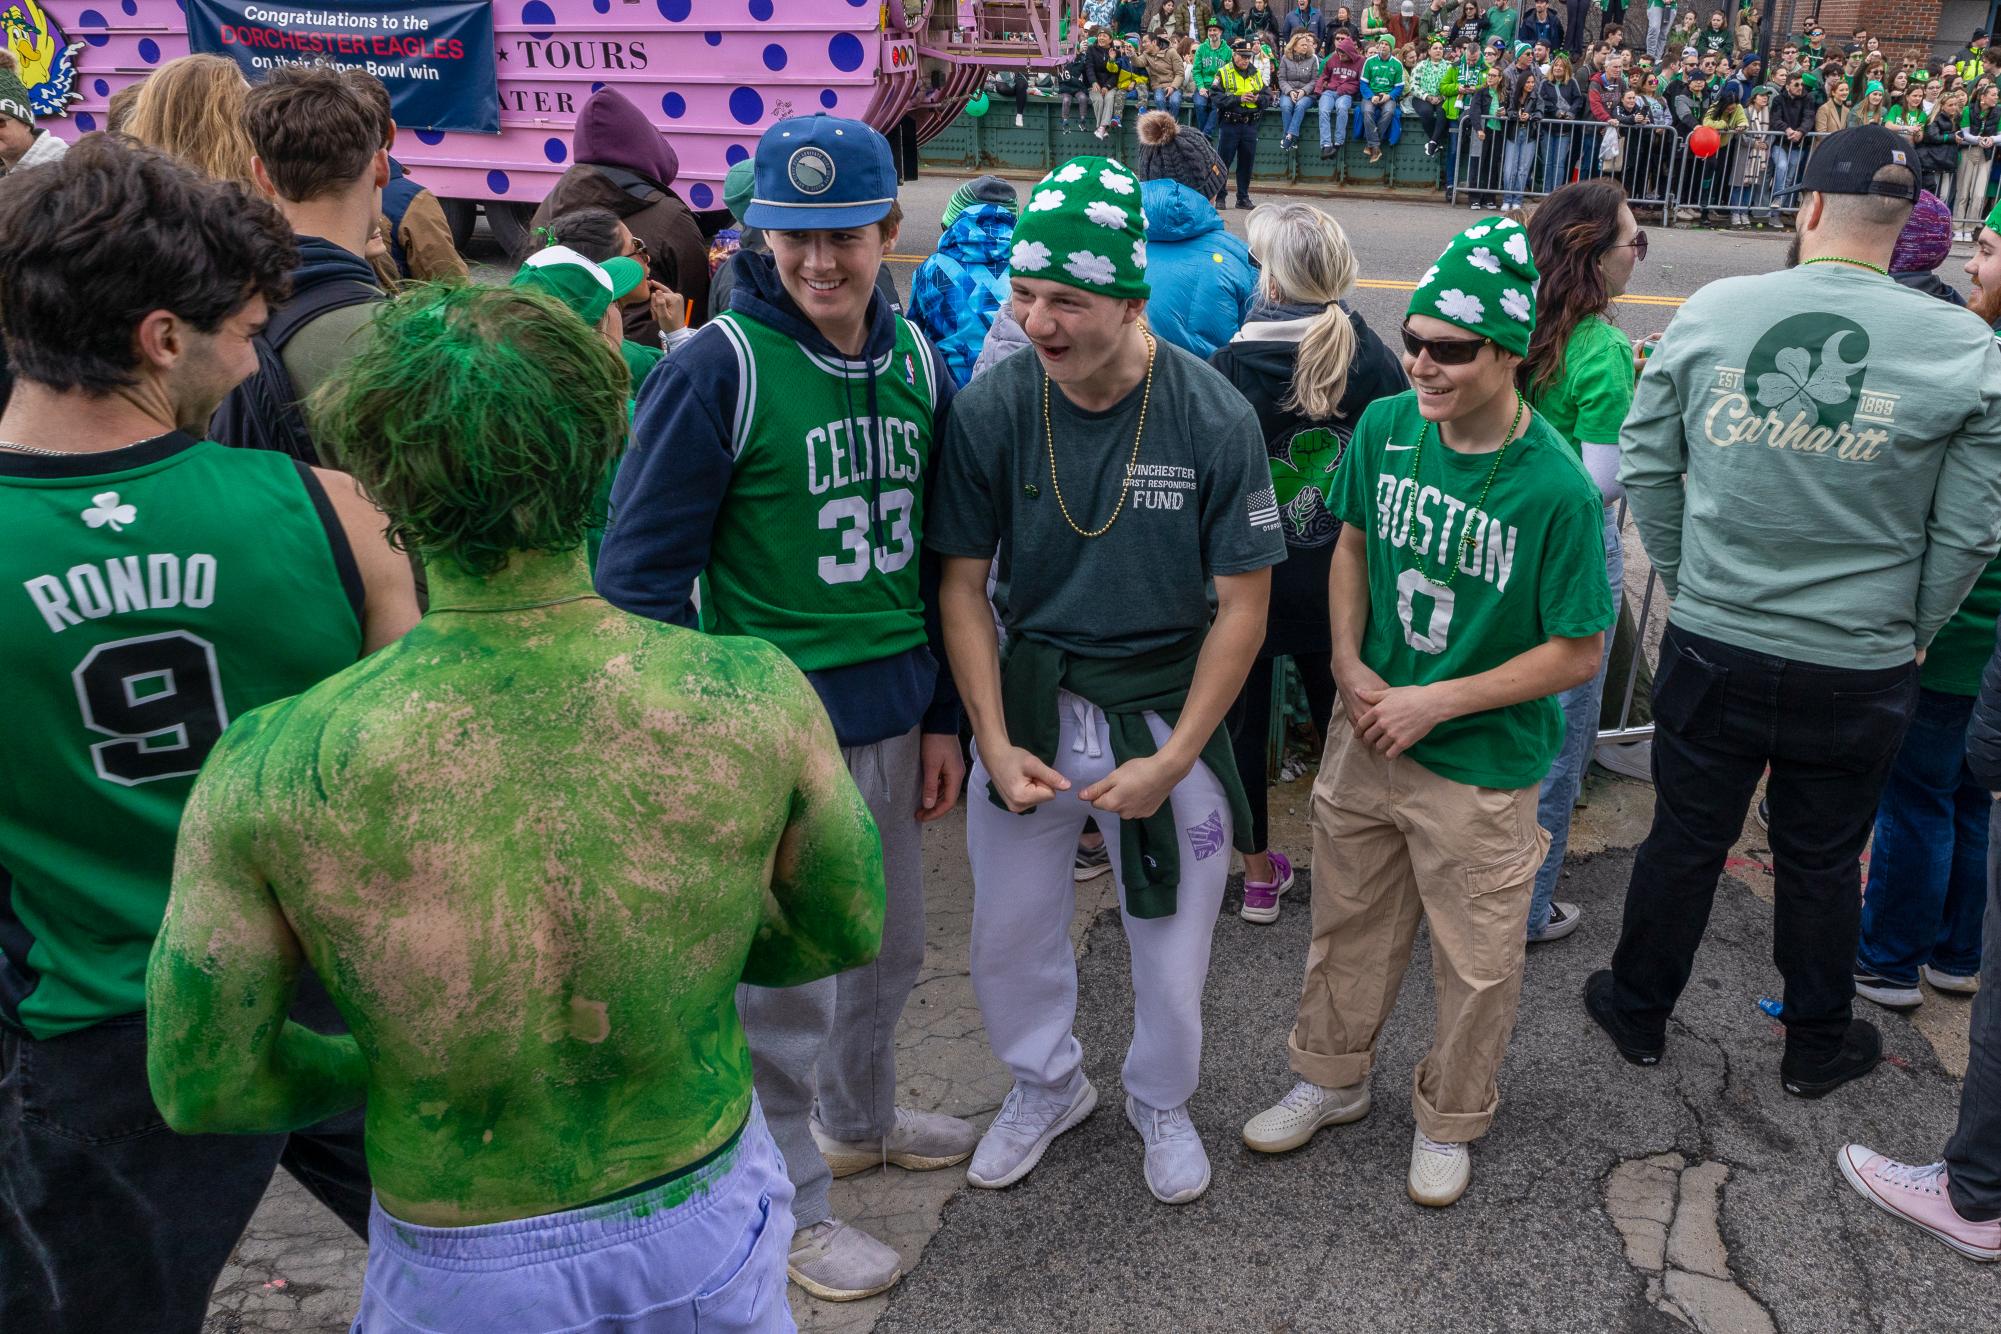 The+2024+St.+Patrick%E2%80%99s+Day%2FEvacuation+Day+Parade+brought+a+sea+of+Irish+green+to+South+Boston+on+Sunday%2C+March+17.+Take+a+look+at+some+of+the+parade+scenes+that+our+staff+photographers+captured+last+week.